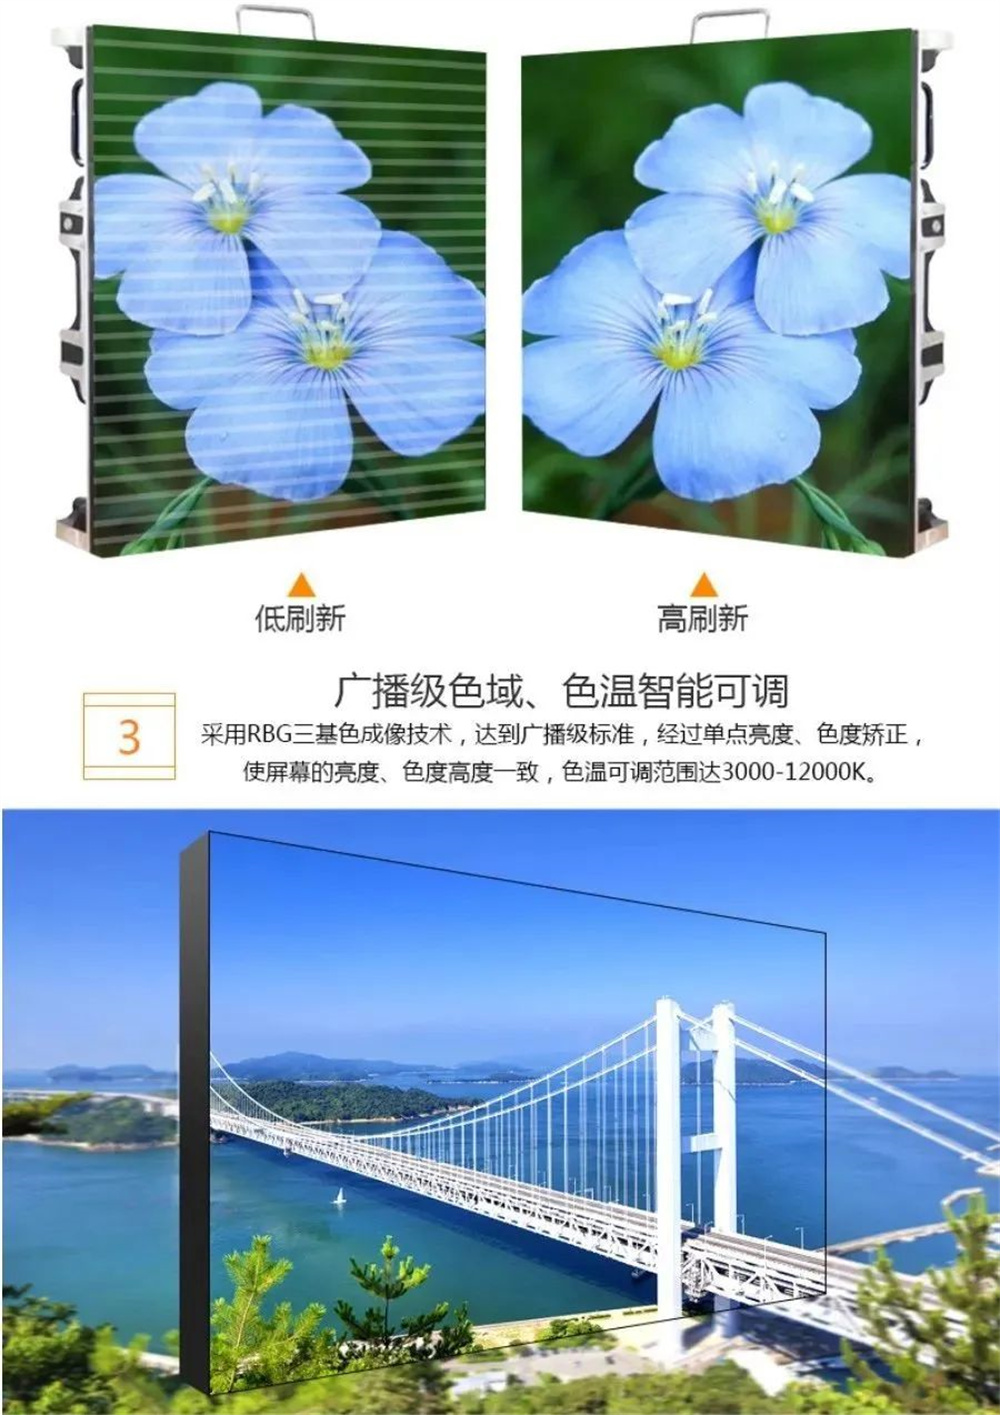 How to Choose Indoor and Outdoor LED Displays